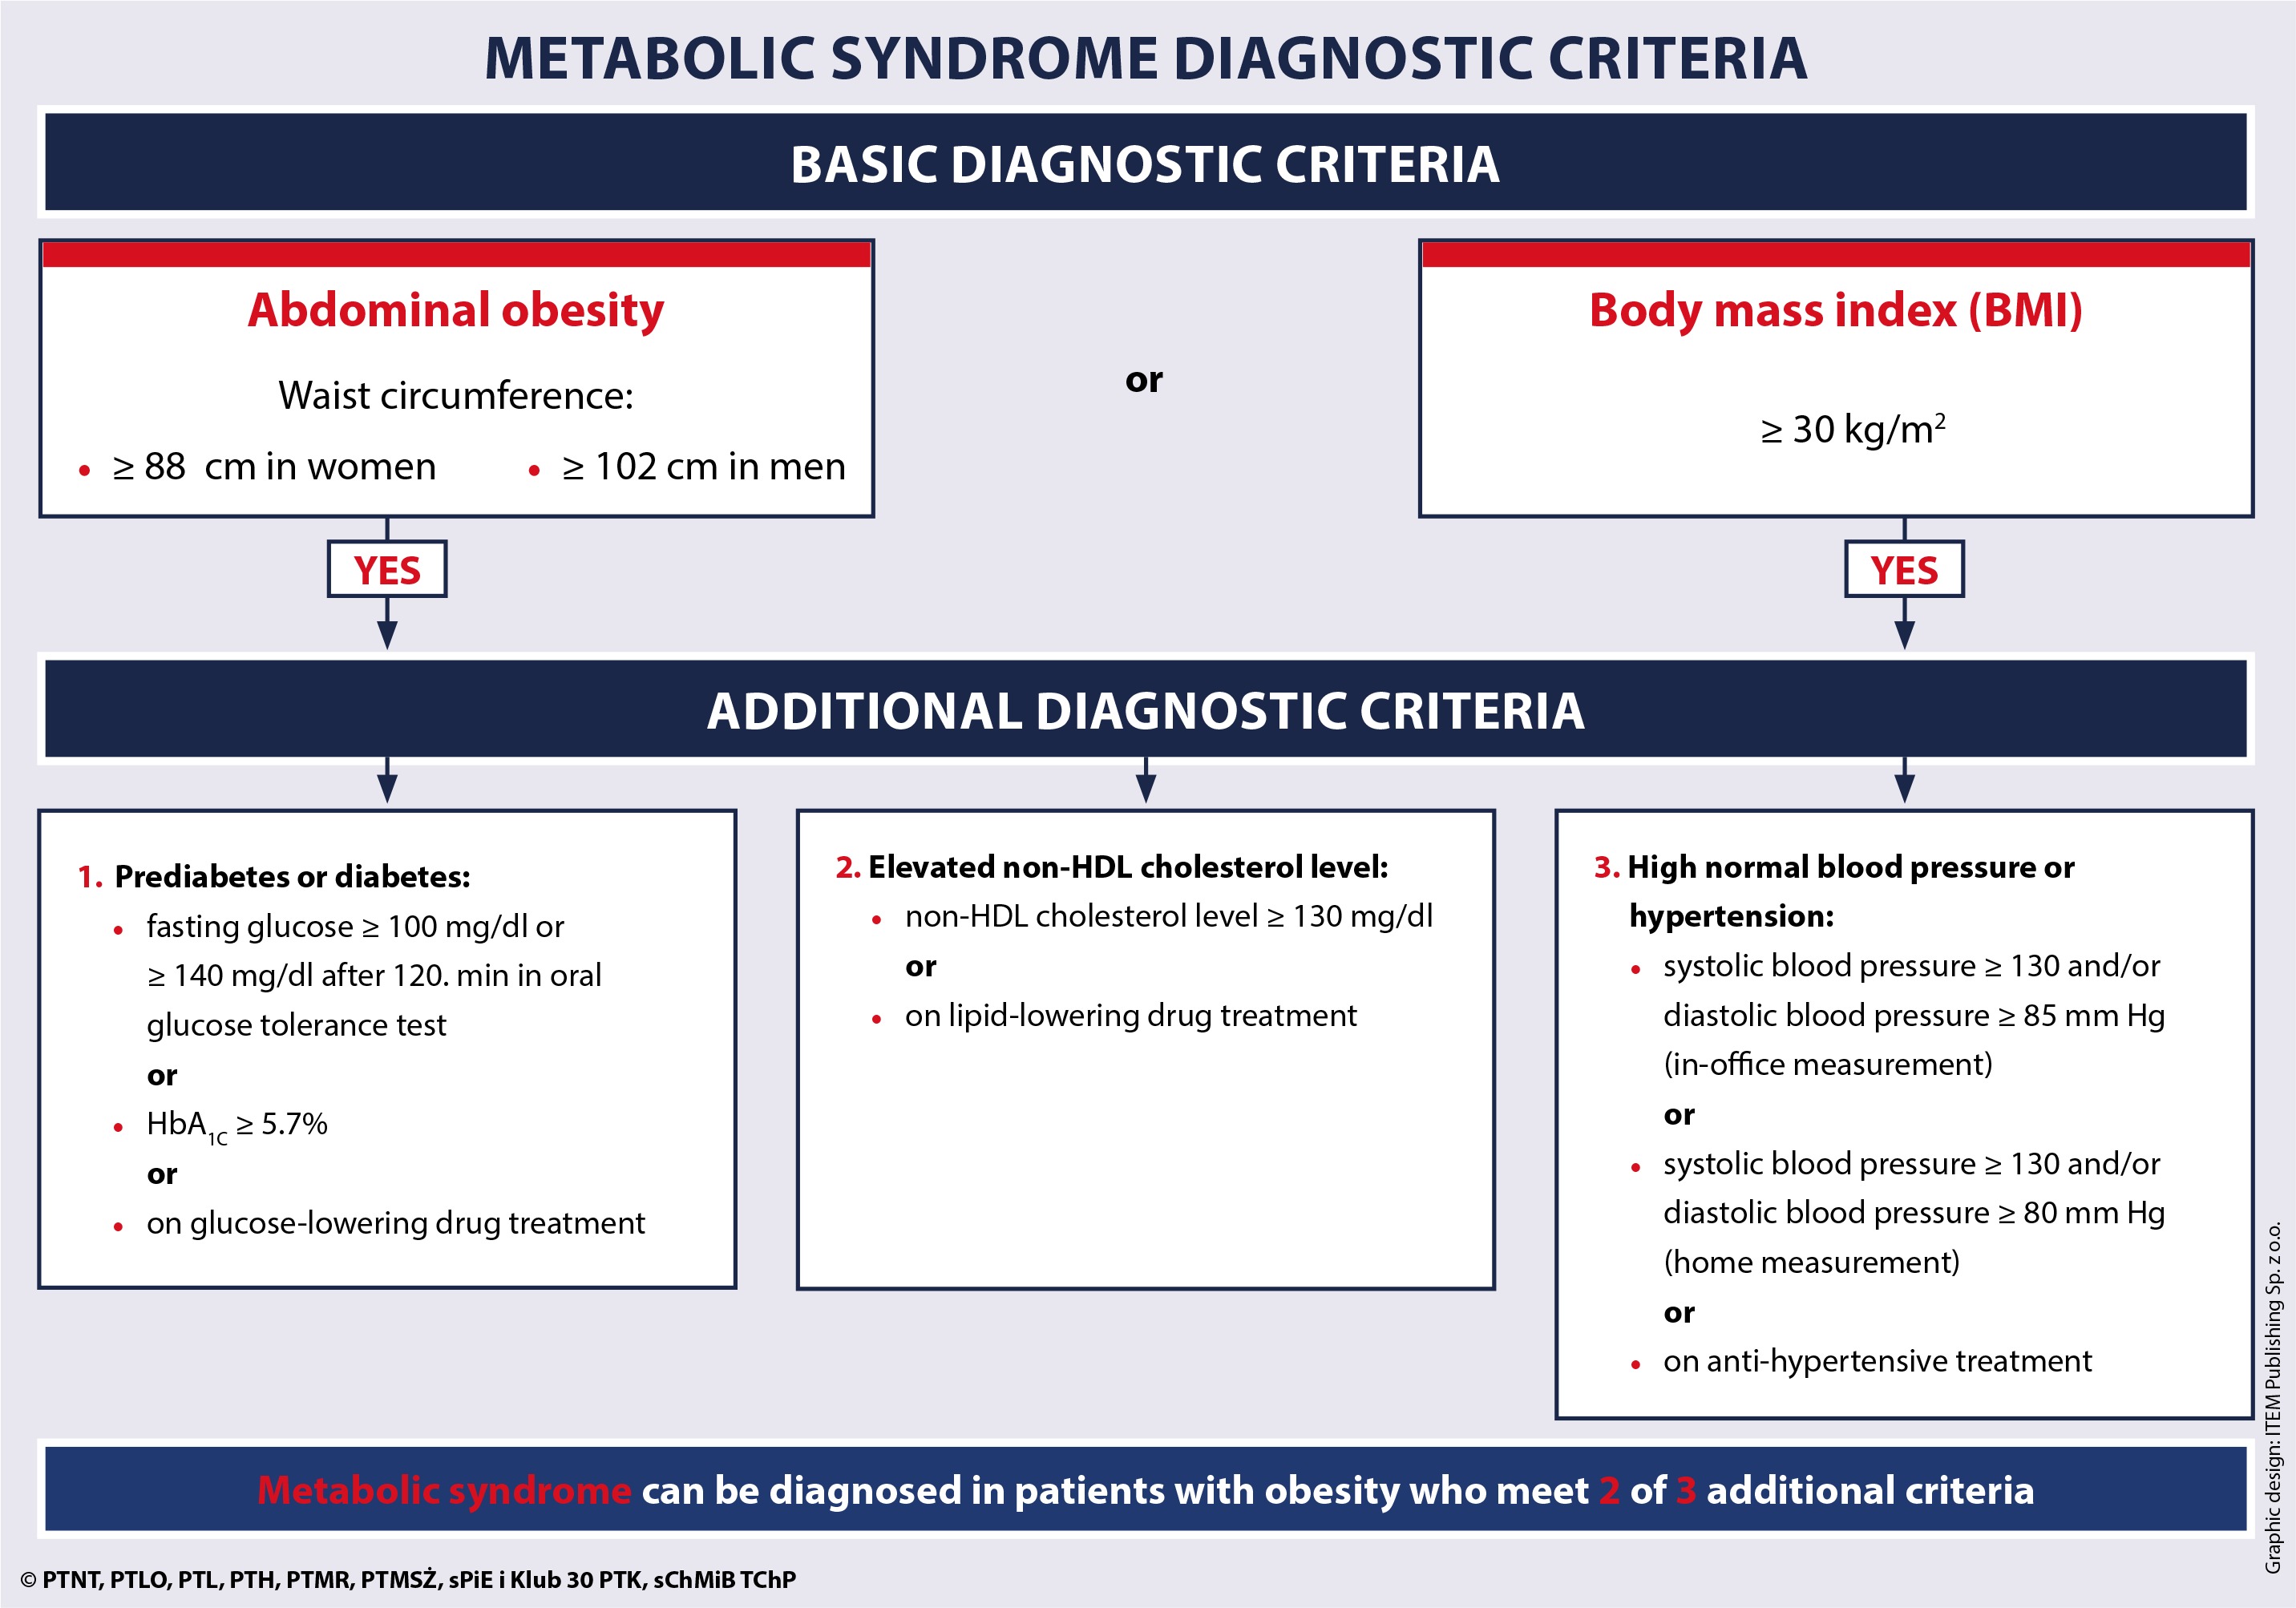 Definition of Metabolic Syndrome